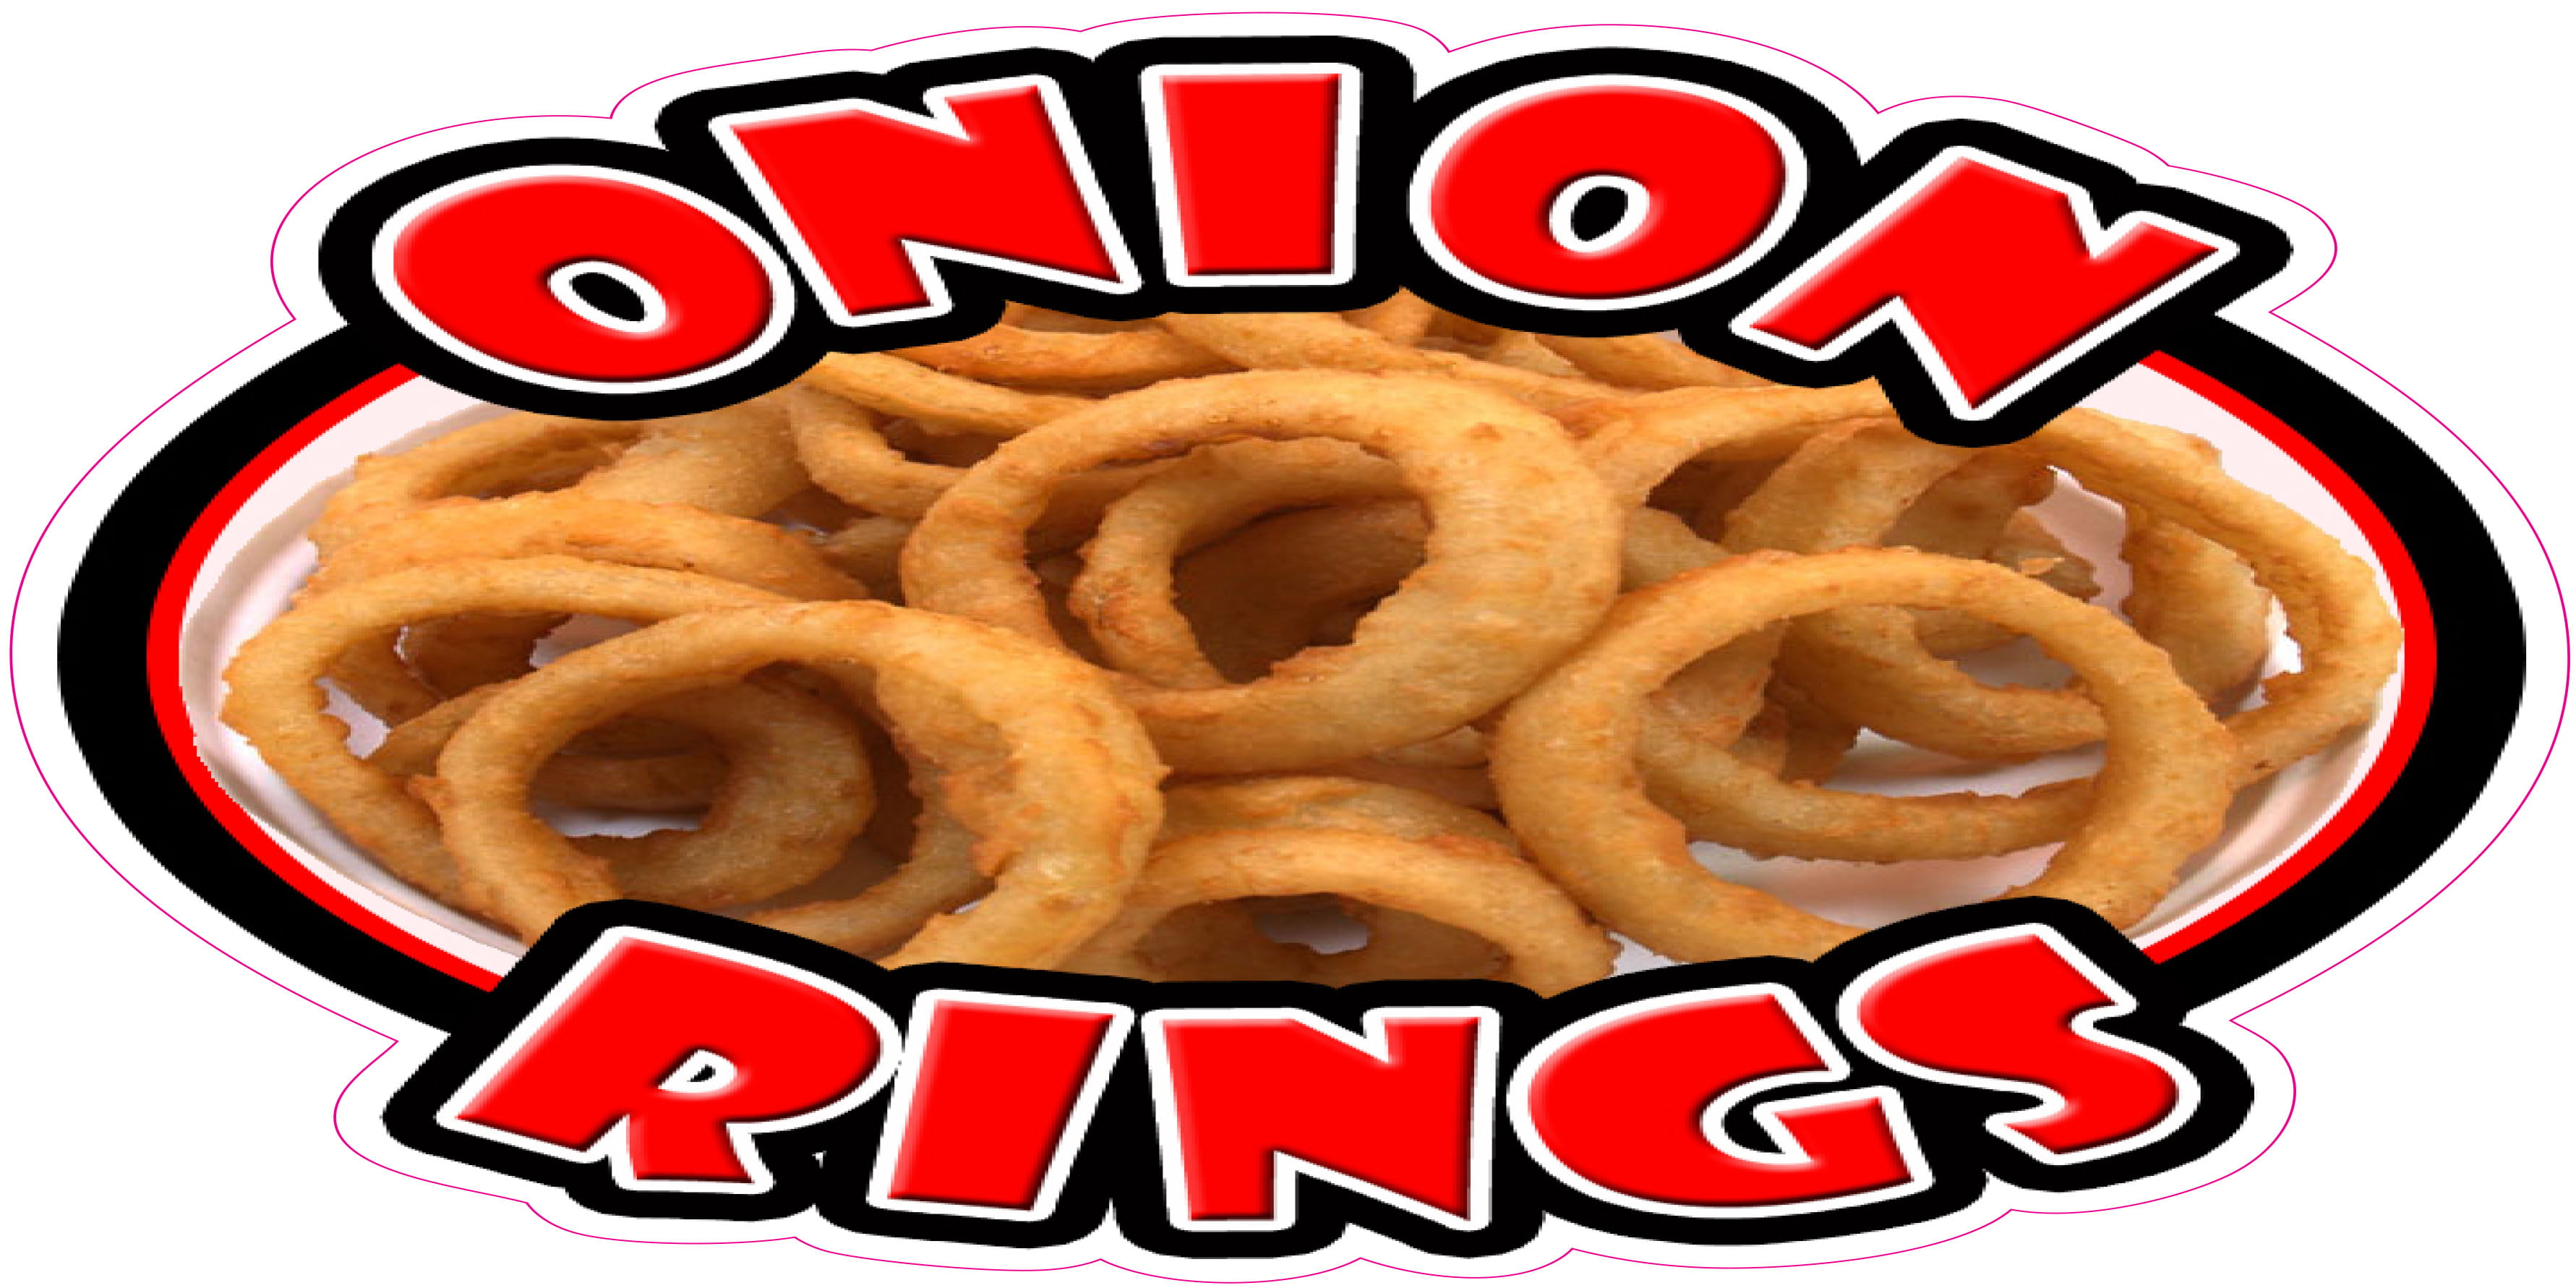 Food Truck Concession Vinyl Sticker CHOOSE YOUR SIZE Onion Rings DECAL 